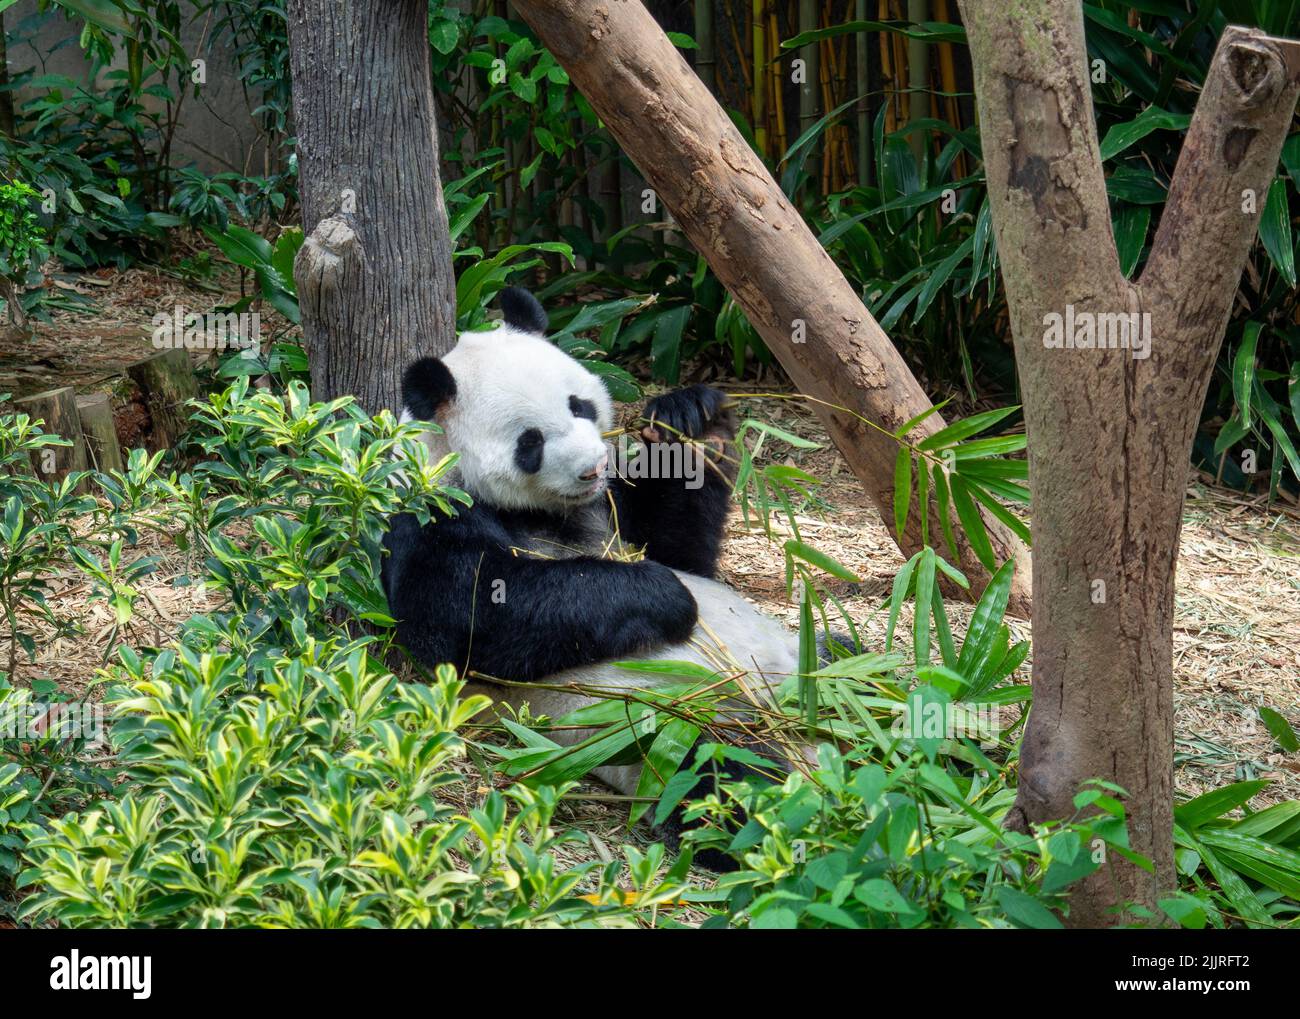 A panda chewing leaves in Singapore Zoo Stock Photo